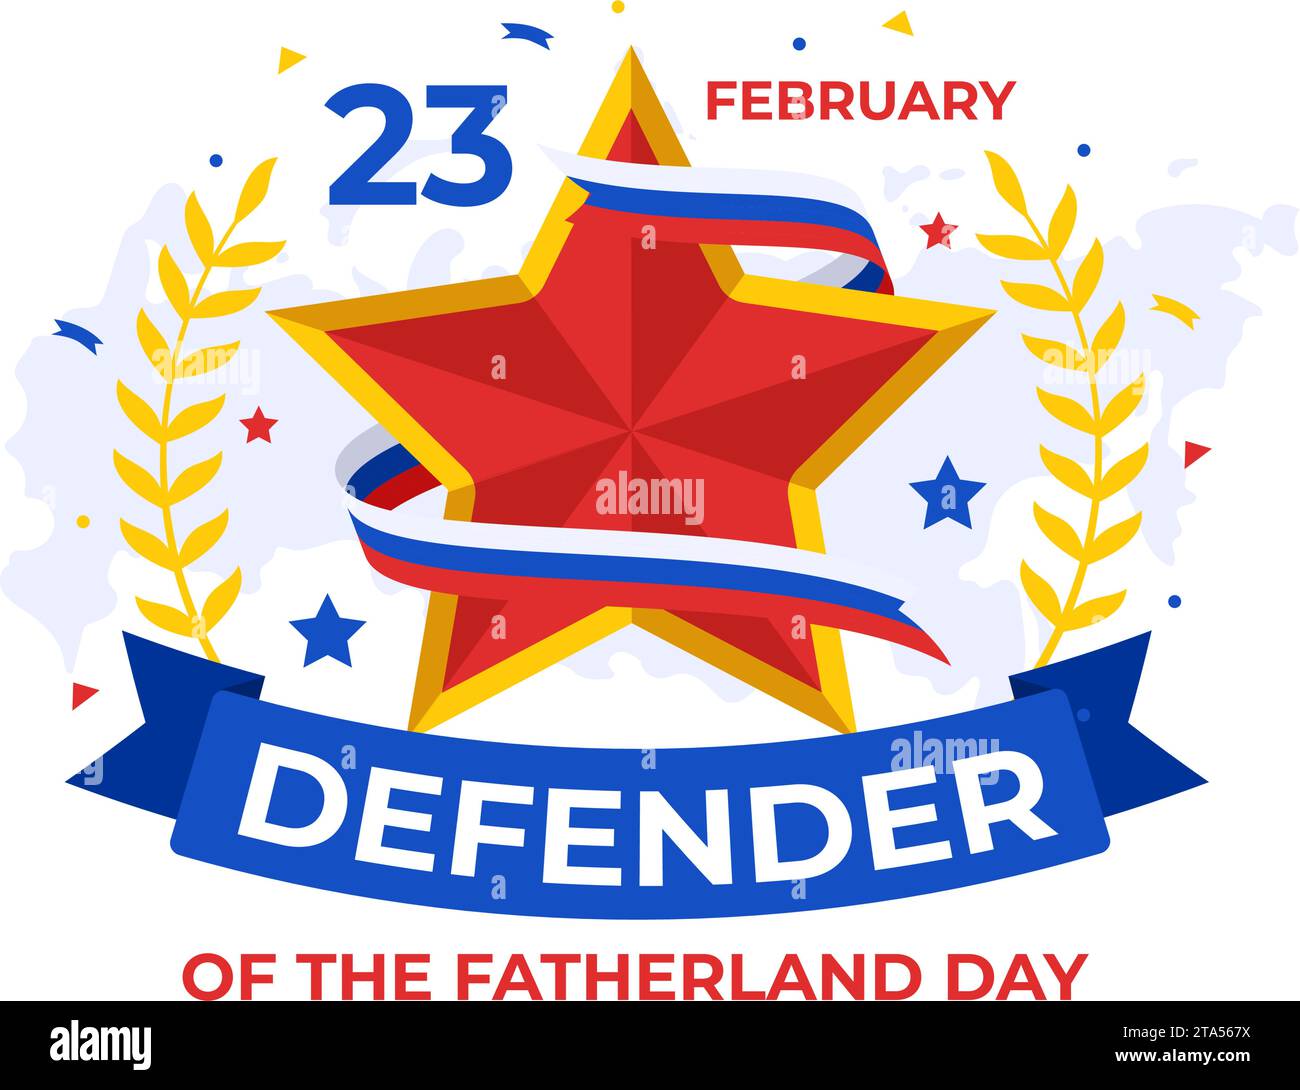 Defender of the Fatherland Day Vector Illustration on 23 February with Russian Flag and Star in National Holiday of Russia Flat Cartoon Background Stock Vector